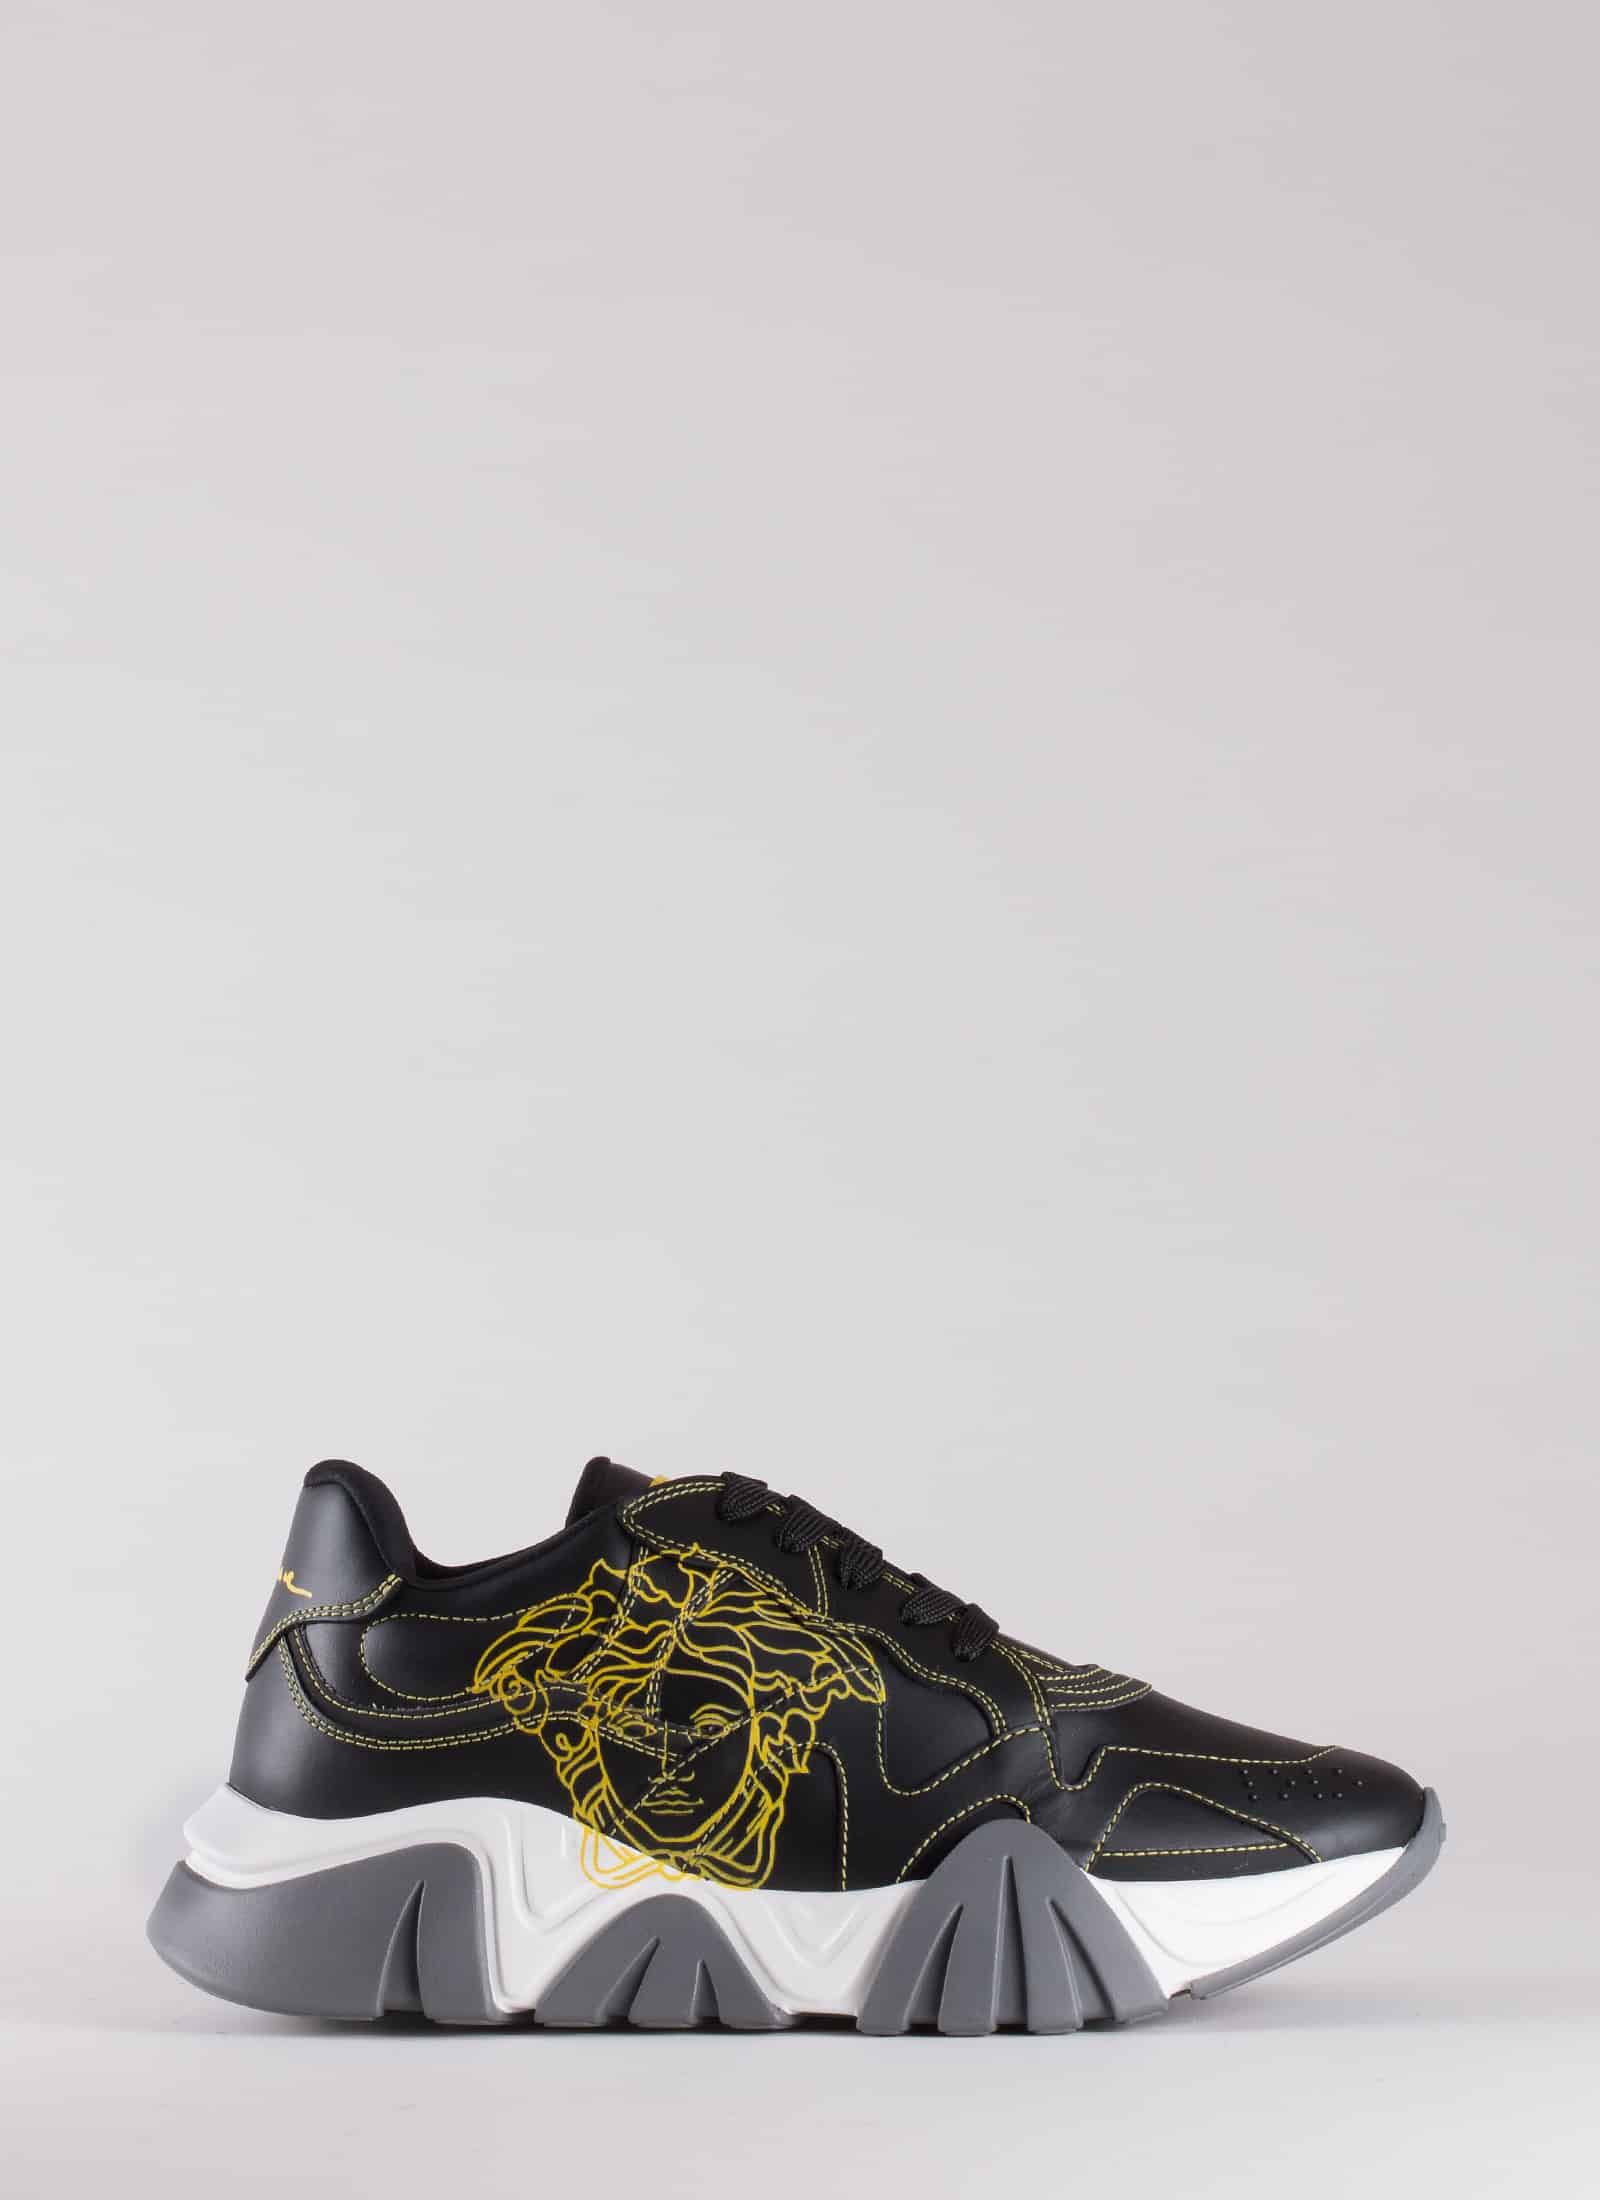 SQUALO LEATHER SNEAKERS - VERSACE